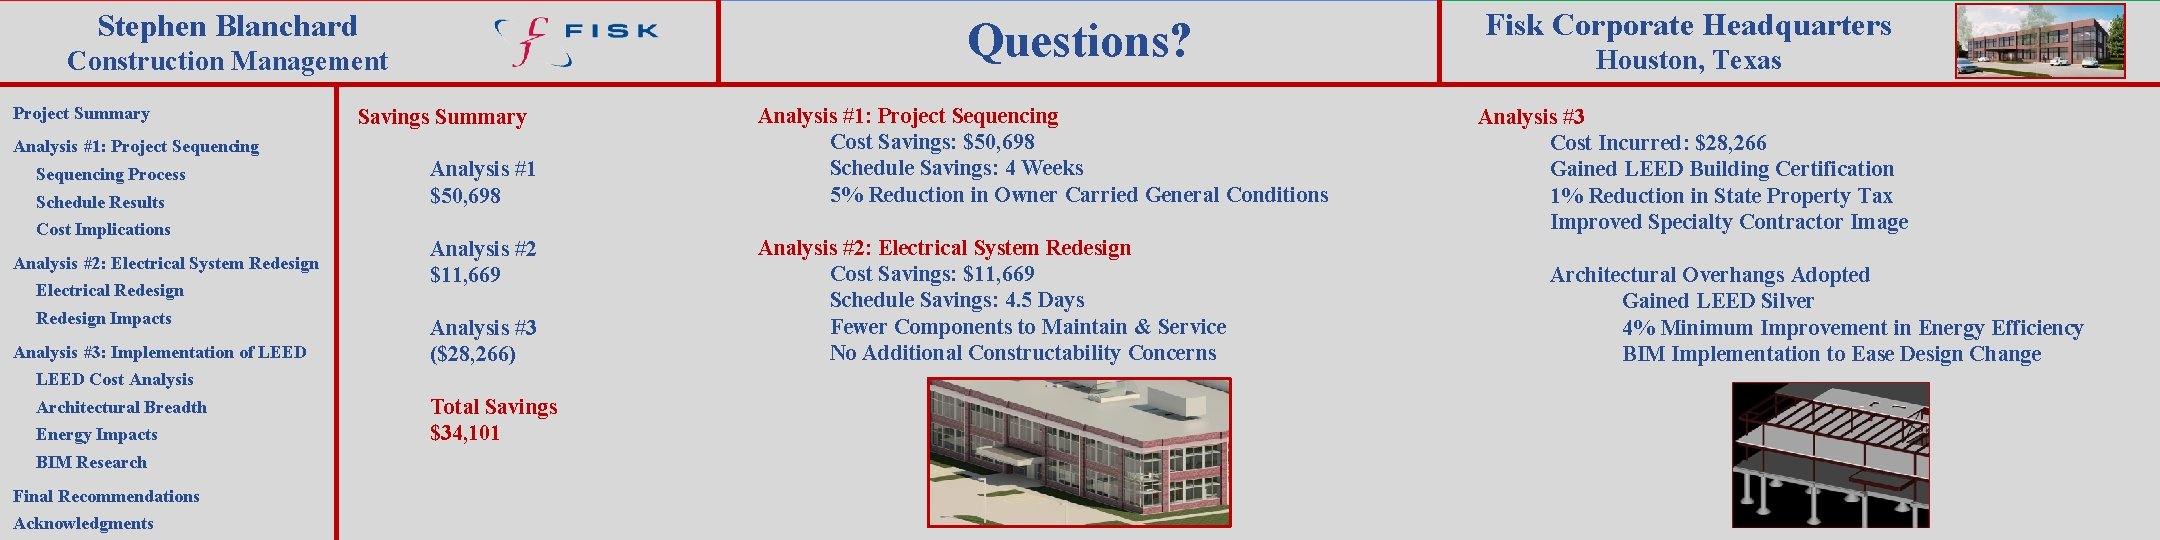 Stephen Blanchard Questions? Construction Management Project Summary Savings Summary Analysis #1: Project Sequencing Process